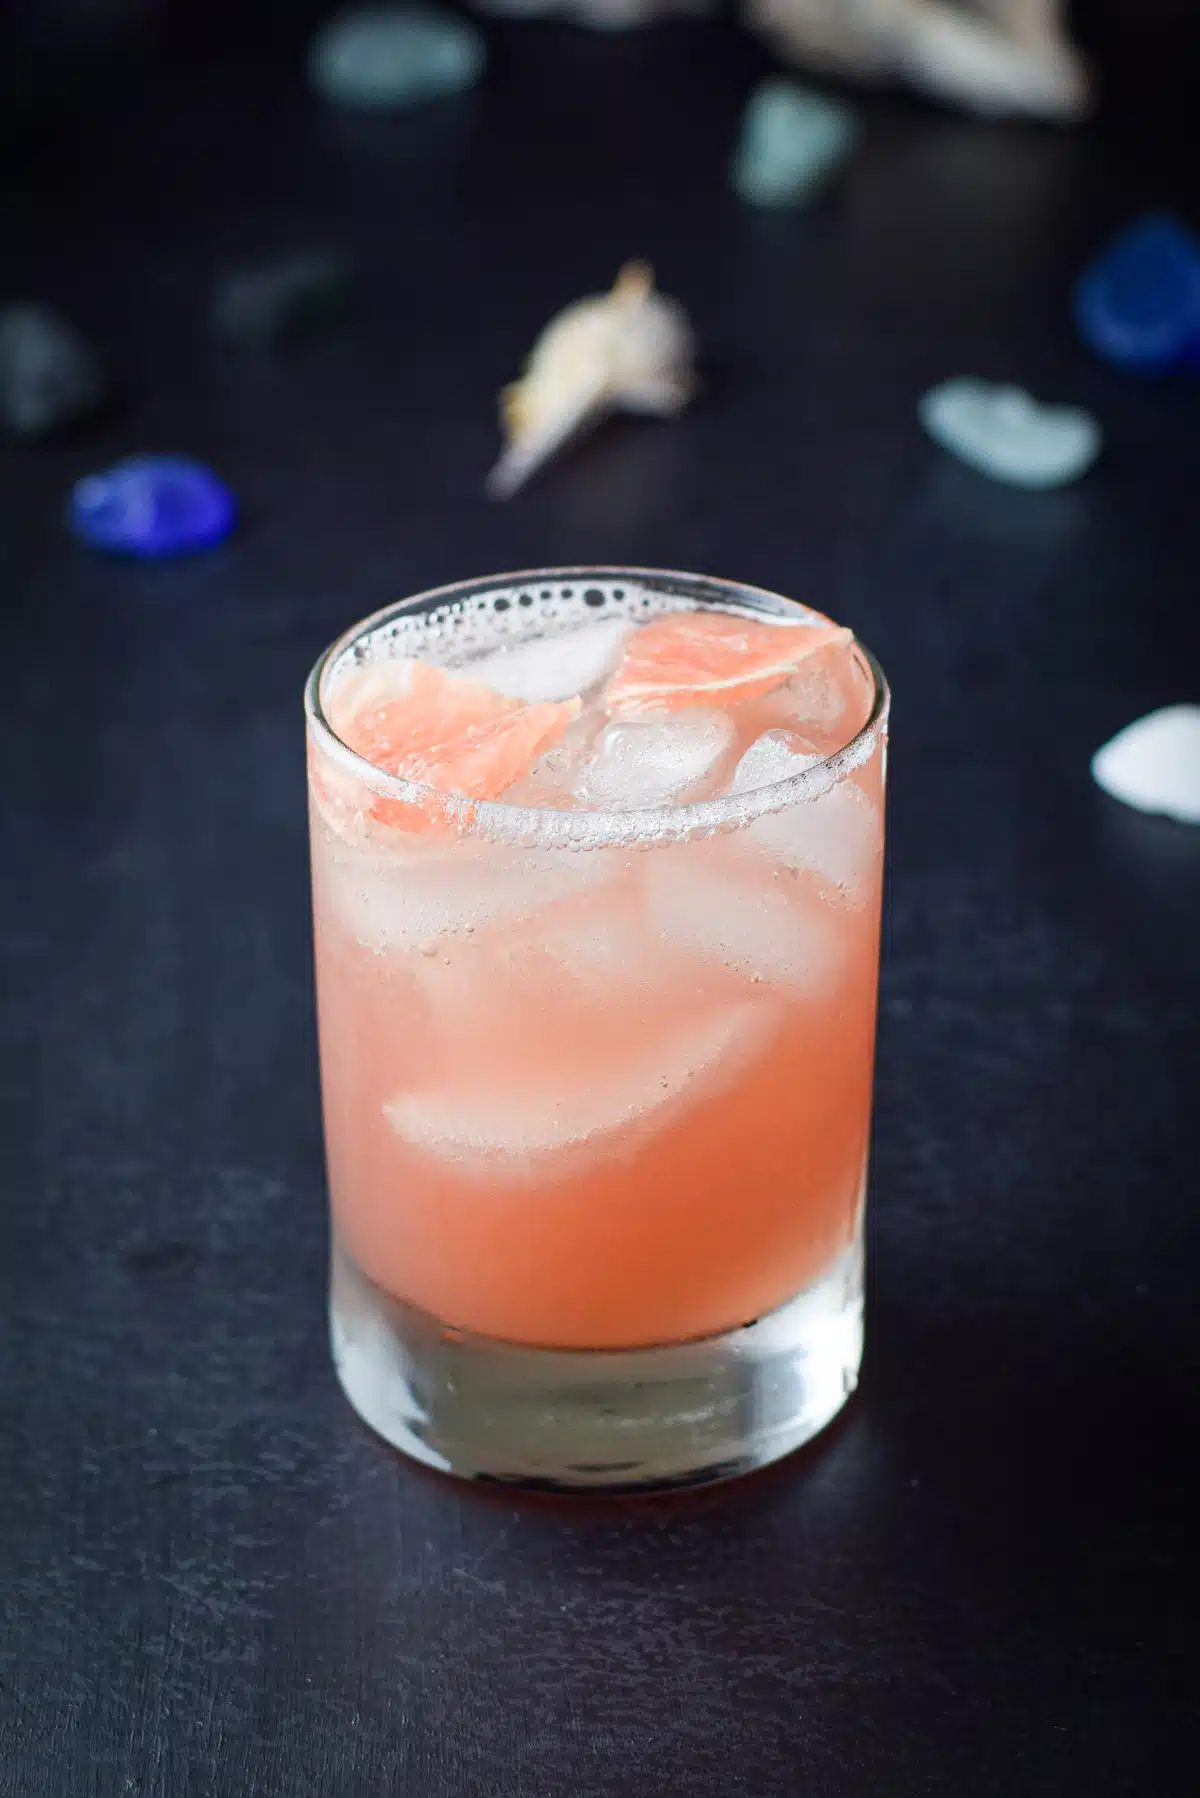 A old fashioned glass of the cocktail with grapefruit chunks in the drink and sea glass and shells in the back